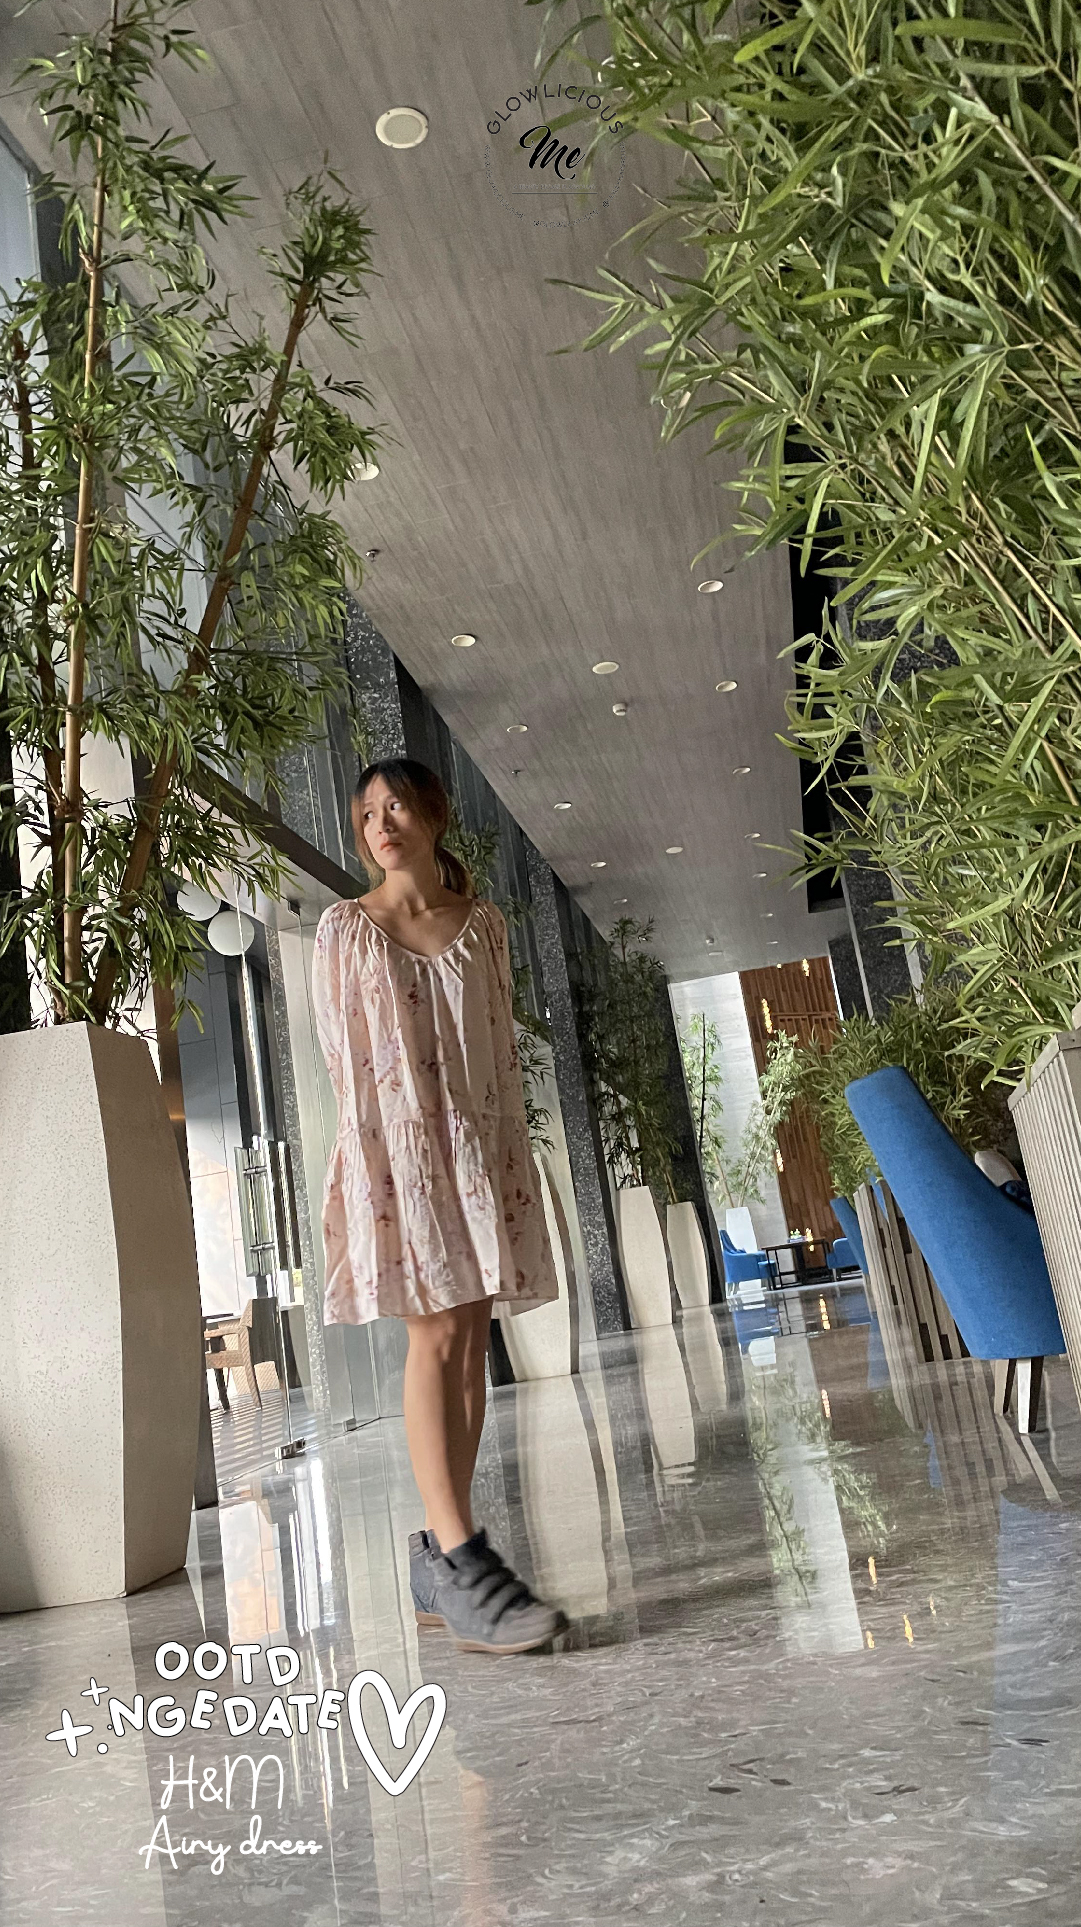 OOTD Afternoon Coffee Date, H&M Airy dress Full